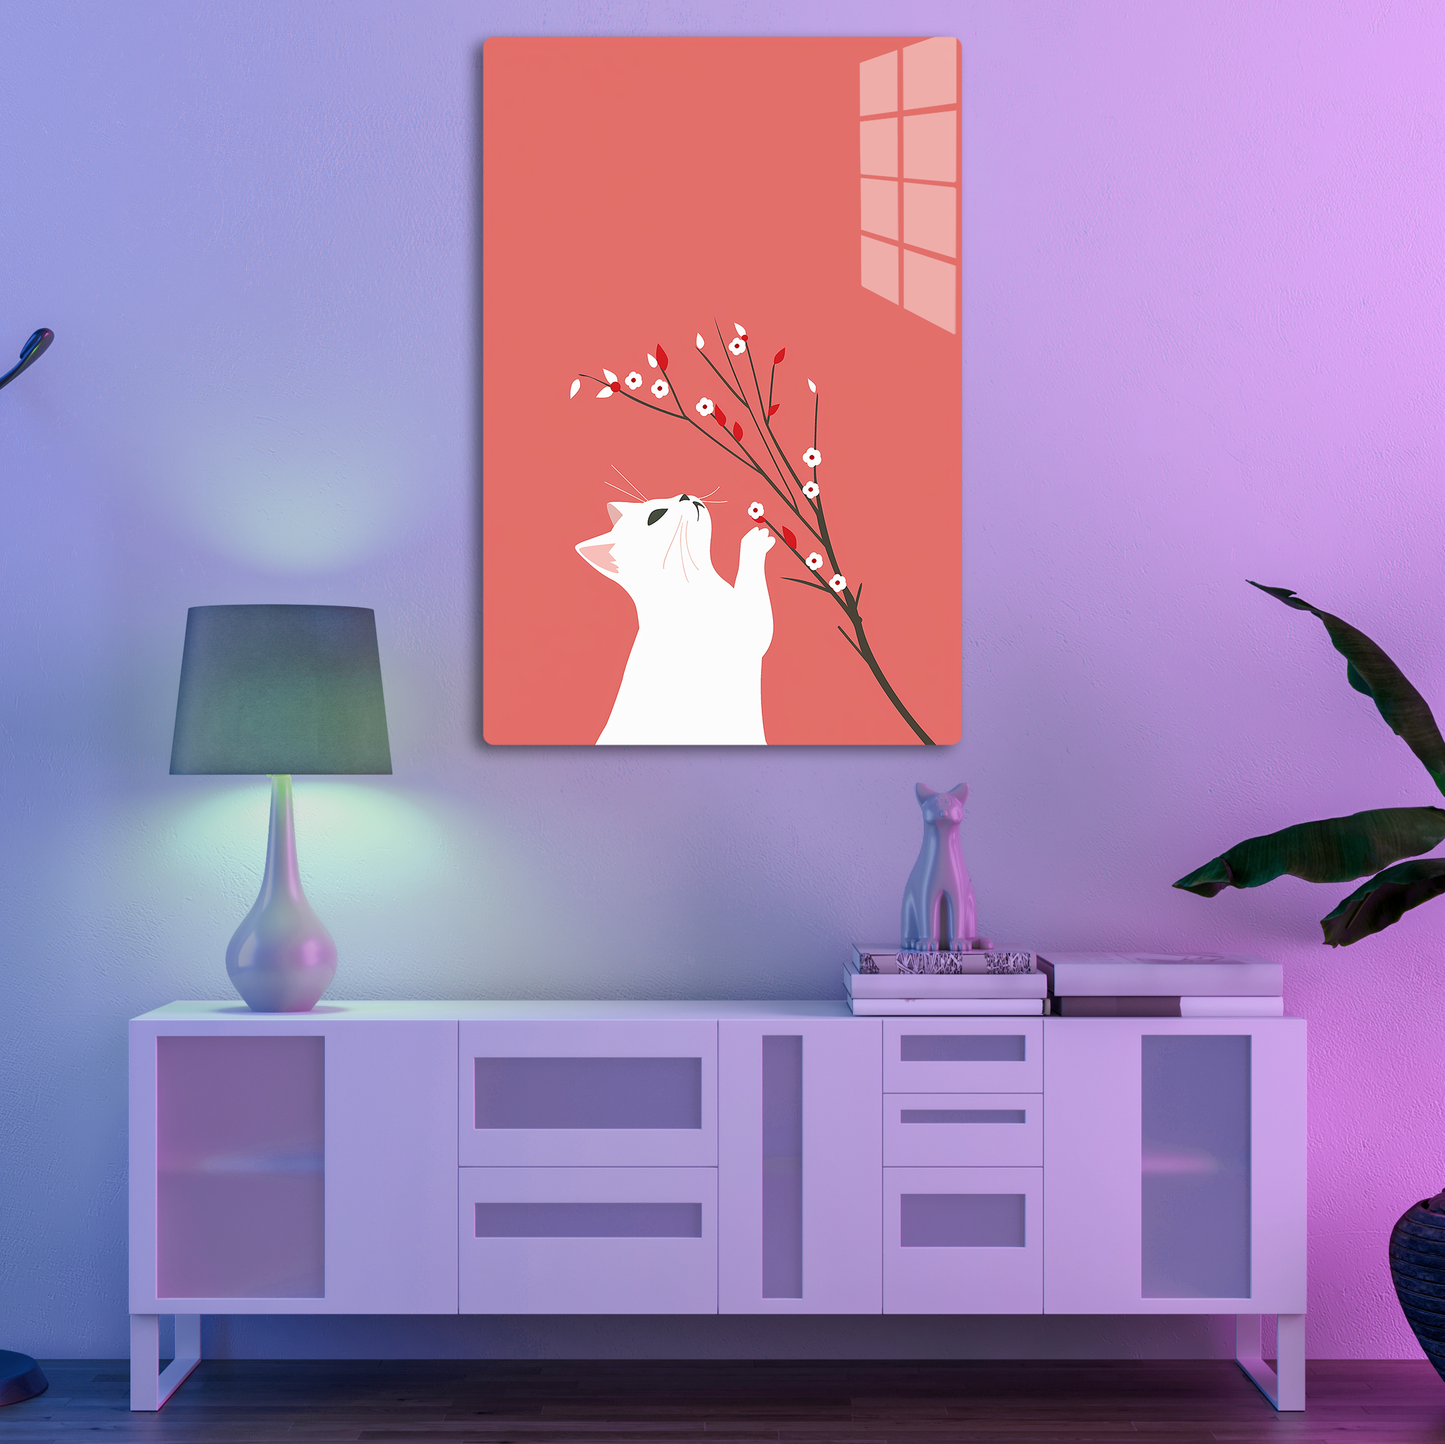 Floral Feline (Acrylic)Step into the universe with an Playful cat interacting with delicate flowers on a coral. Acrylic art from RimaGallery. Experience the cosmos in your home with vibranRimaGallery